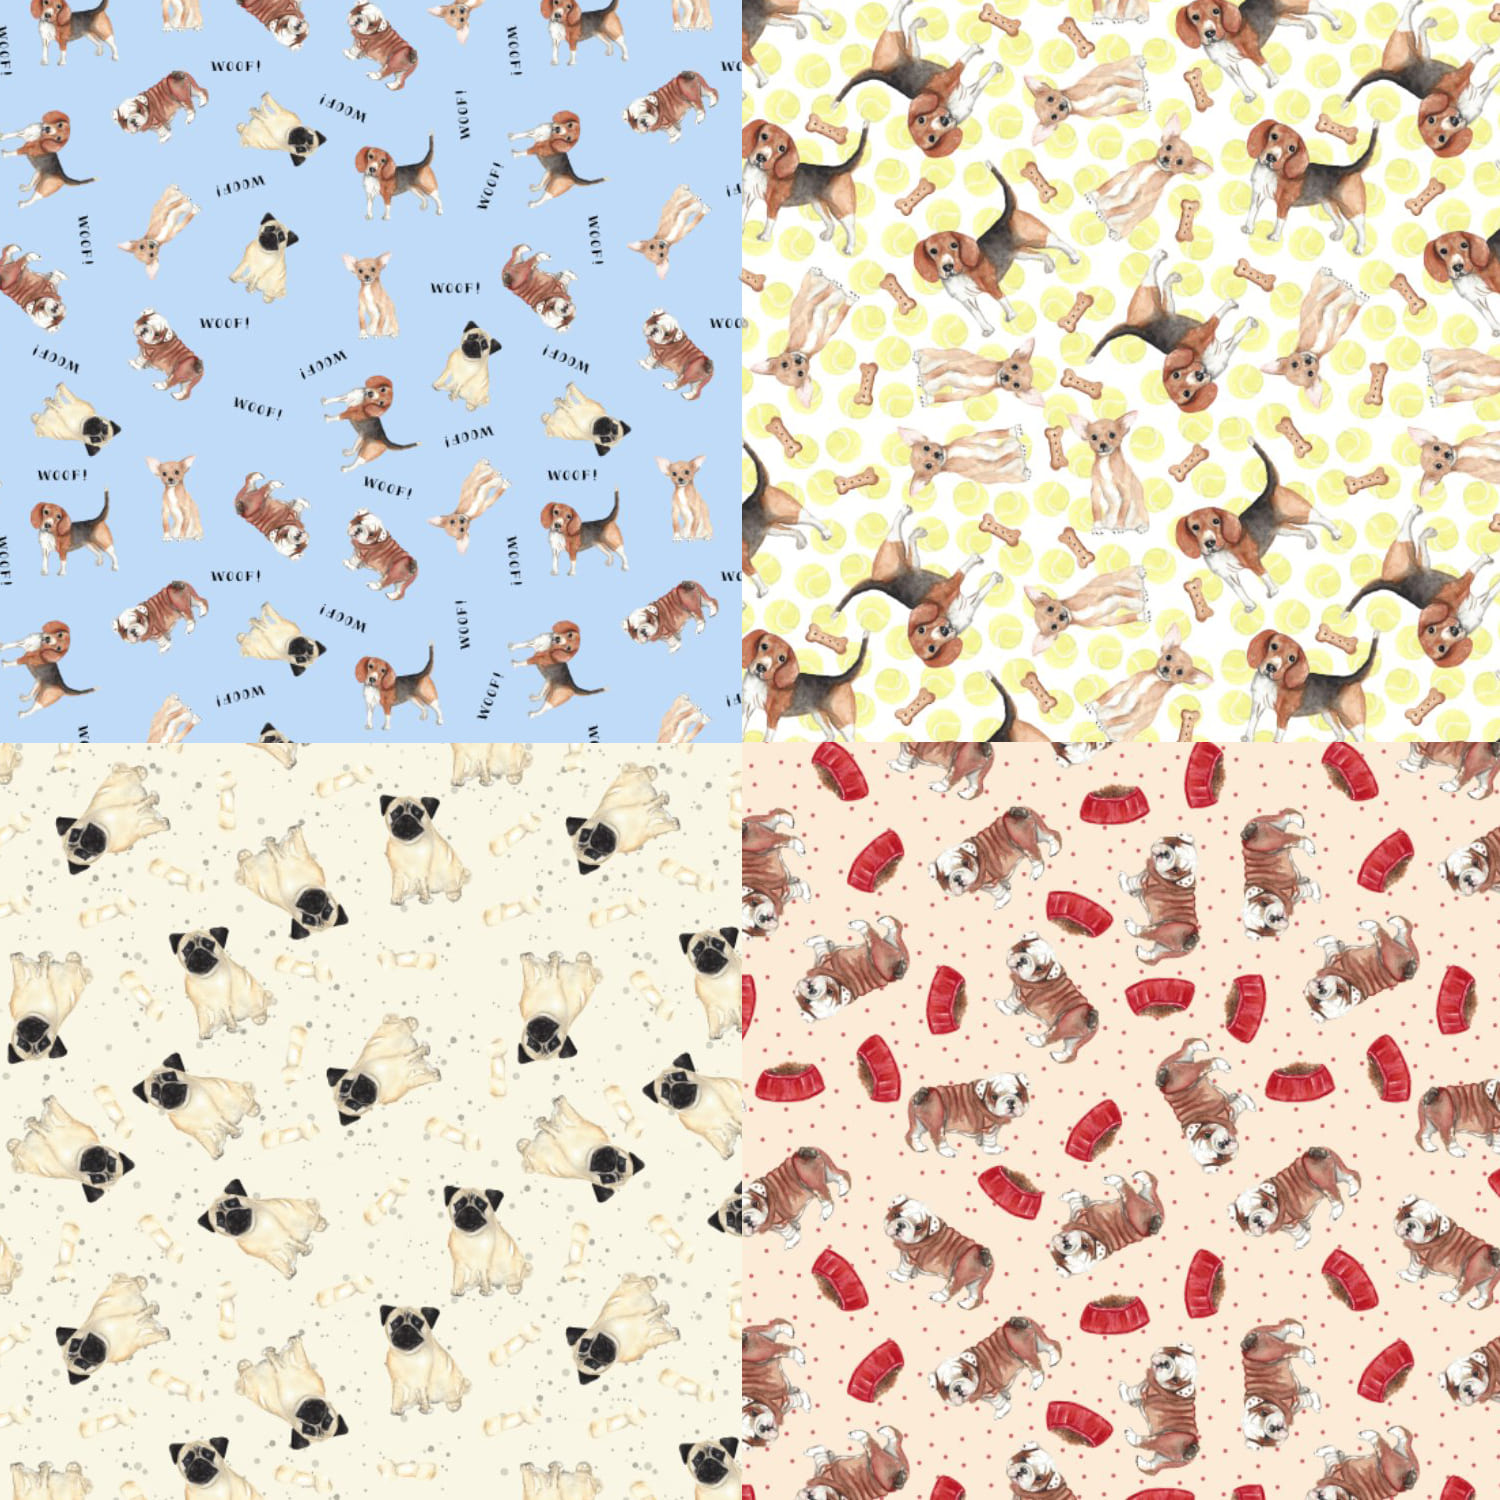 Watercolor Seamless Patterns - Dogs cover.